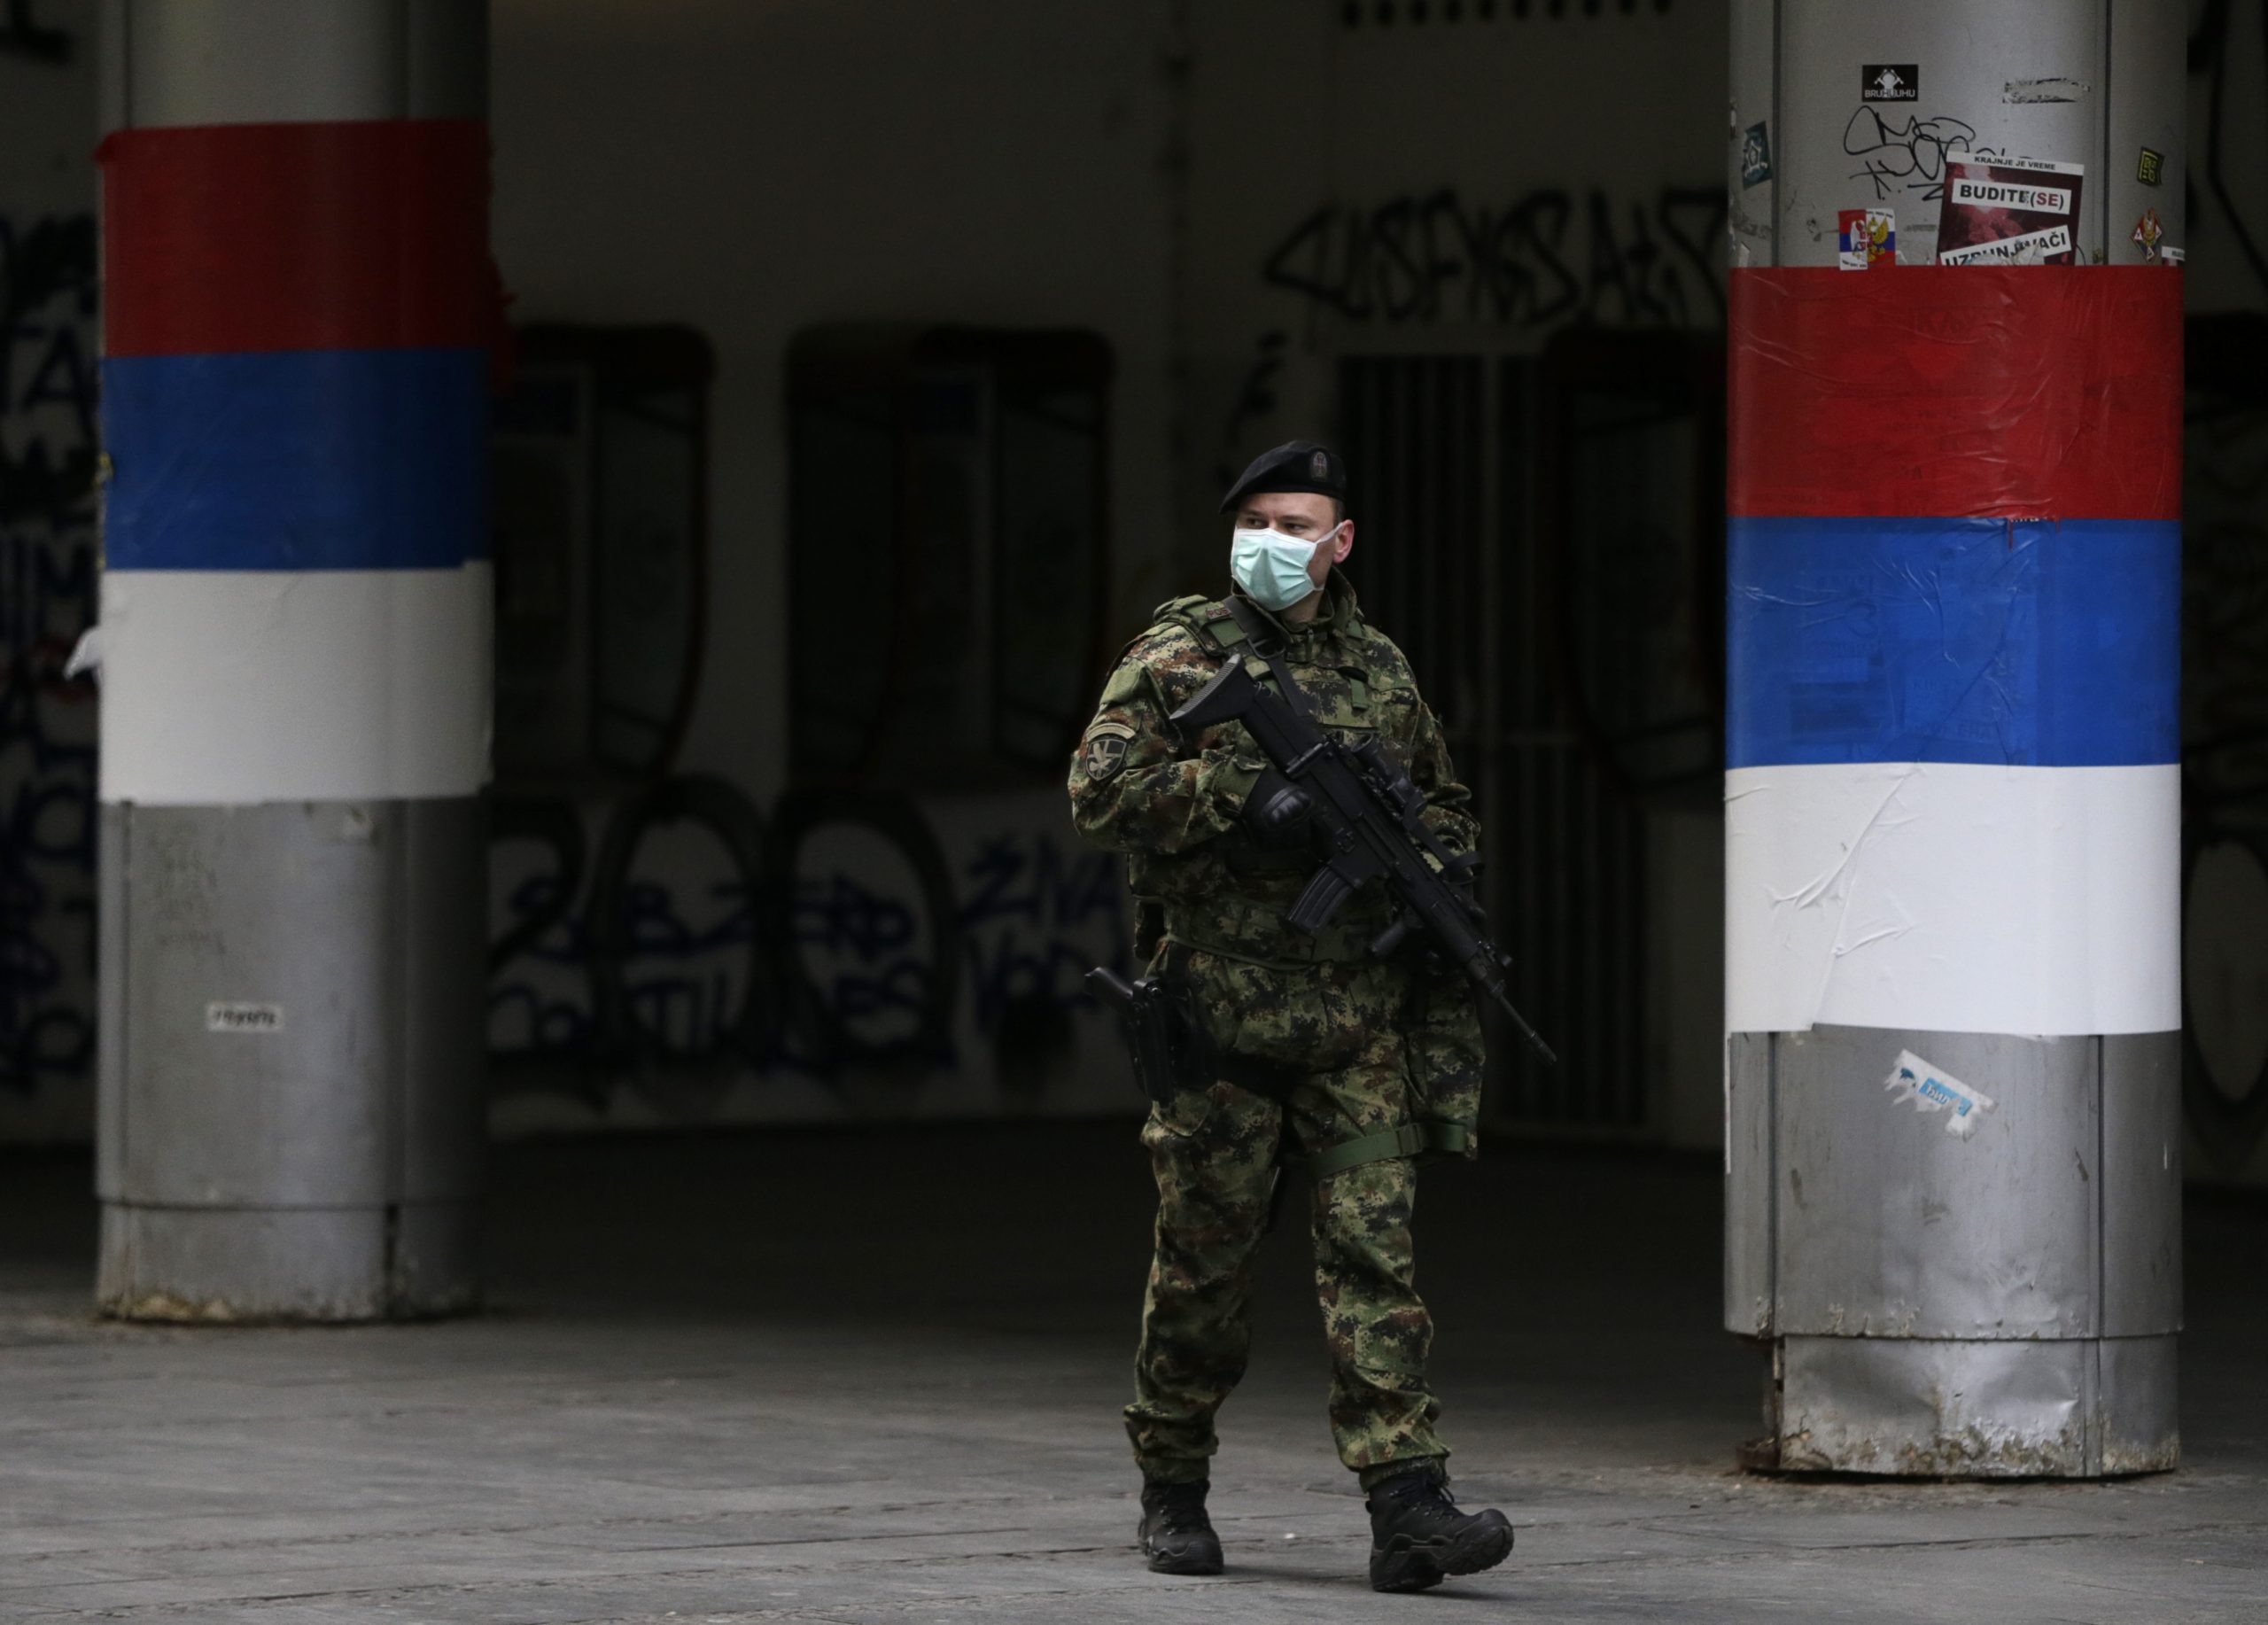 epa08316446 Serbian army soldiers patrol during the curfew starting 5PM till 5AM in Belgrade, Serbia, 23 March 2020. The Serbian authorities declared the state of emergency on Sunday 15 March over the situation with the coronavirus. Several European countries have closed borders, schools and public facilities, and have cancelled major sports and entertainment events in order to prevent the spread of the coronavirus SARS-CoV-2 which causes the Covid-19 disease.  EPA/MARKO DJOKOVIC